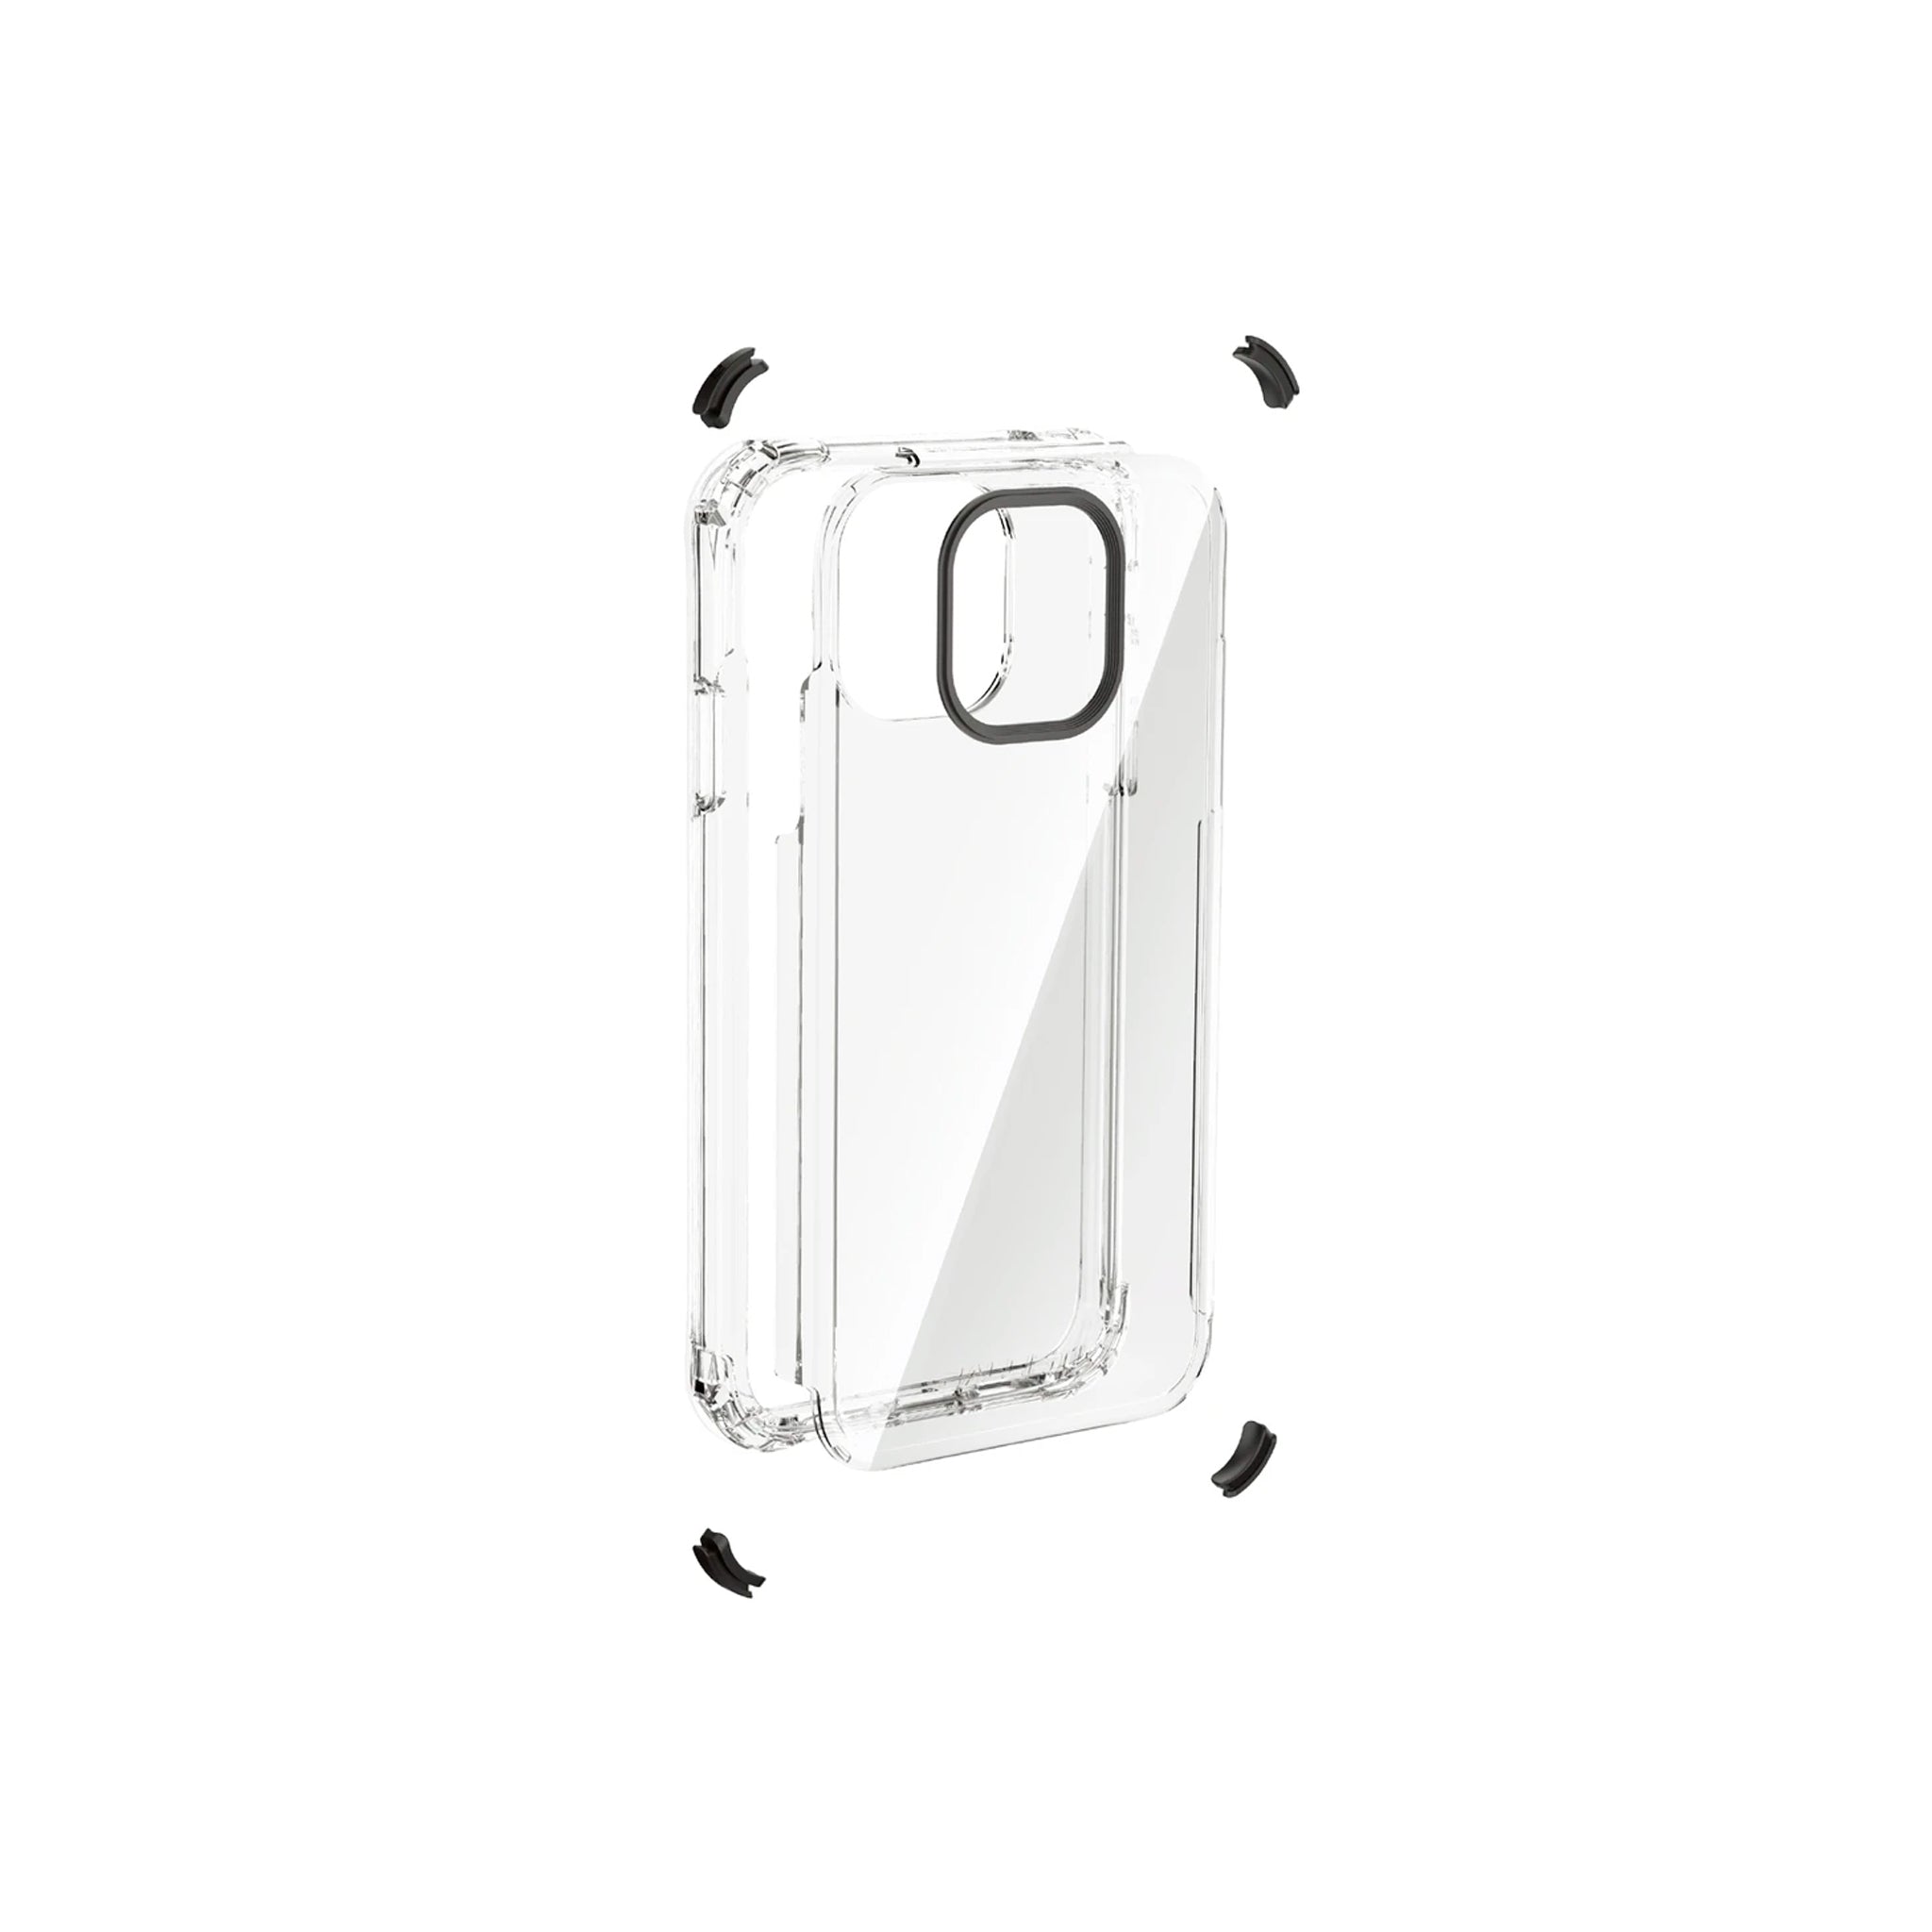 Ballistic - Jewel Series For iPhone XR - Clear